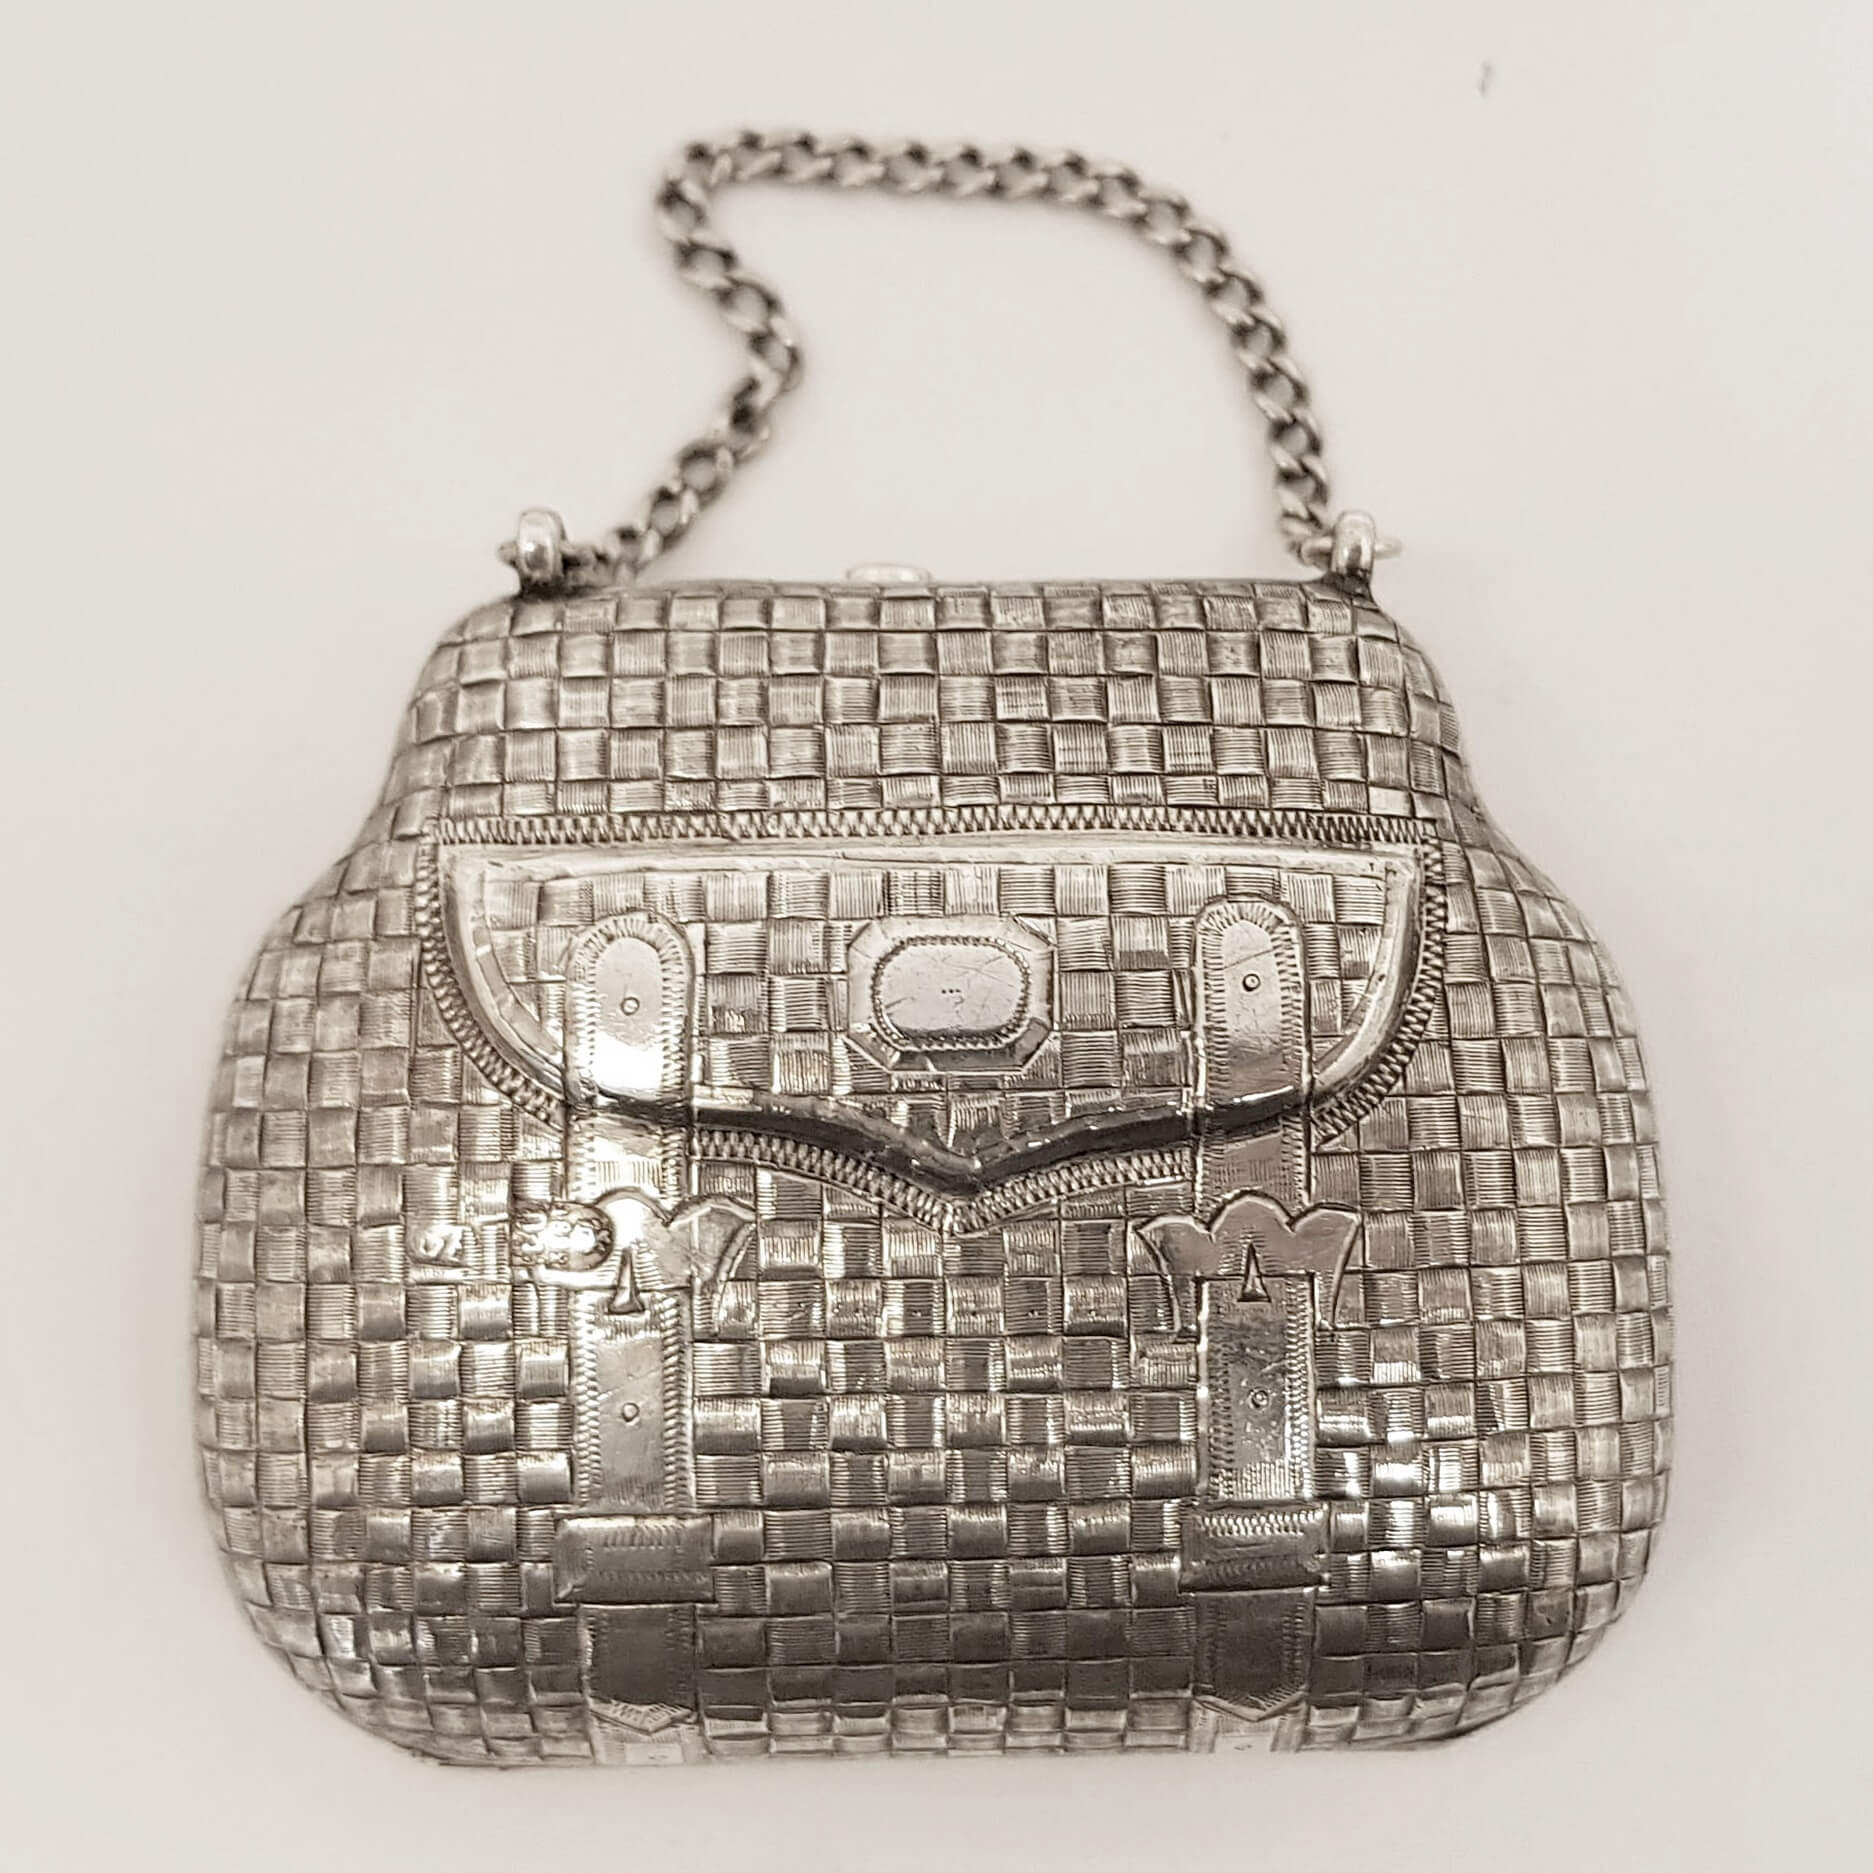 Antiques Atlas - Antique English Sterling Silver Coin Purse - 1913